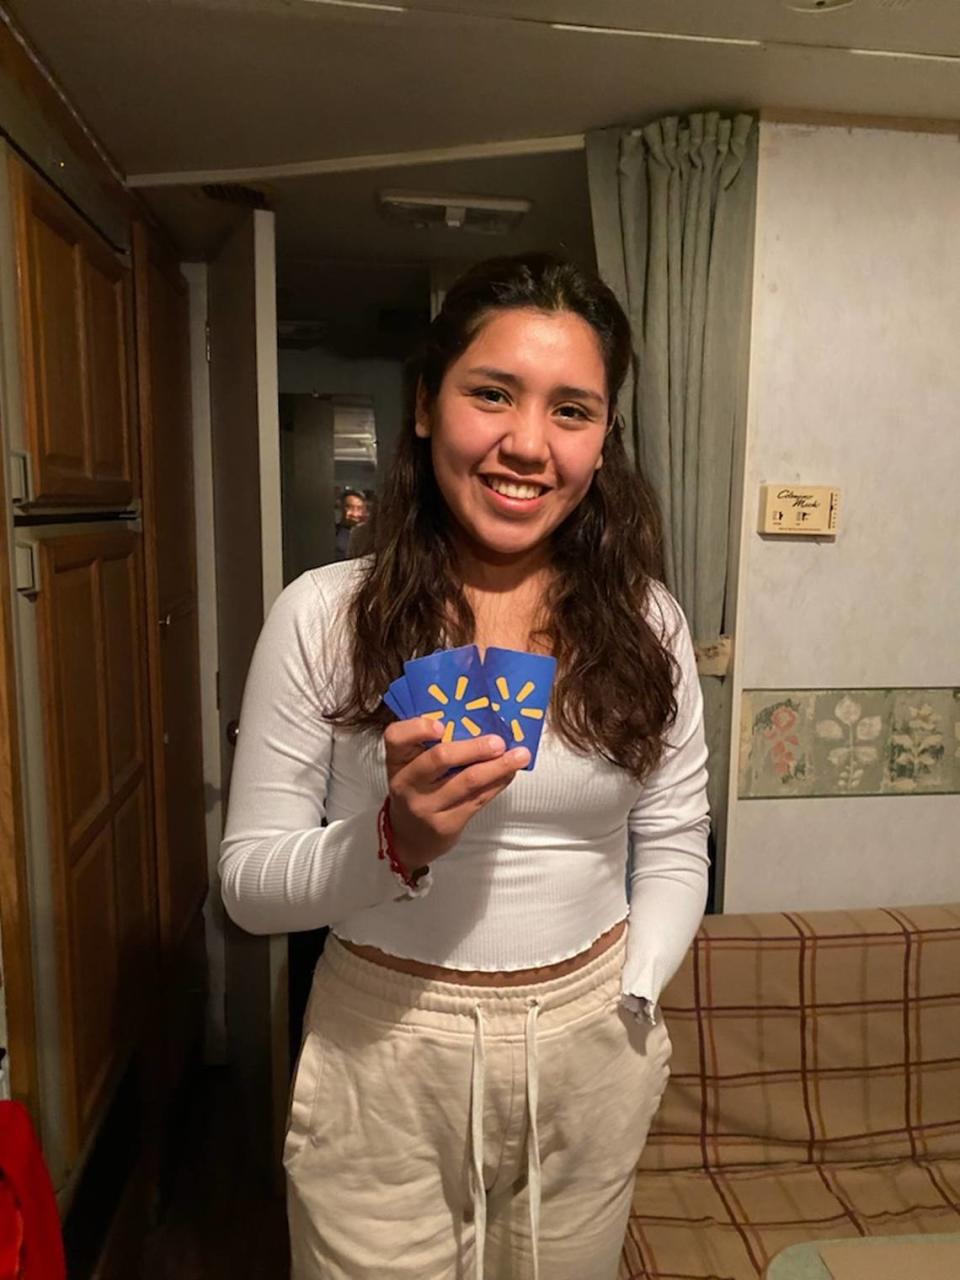 Brigite Valverde was 23 when she lost part of her left arm in a meat grinder accident in Bolivia in 2022. She holds some Walmart gift cards she received in the Miami Herald and el Nuevo Herald’s Wish Book 2023 season. She’s awaiting word on whether she may receive a functioning prosthetic arm as donors assess estimated cost quotes.